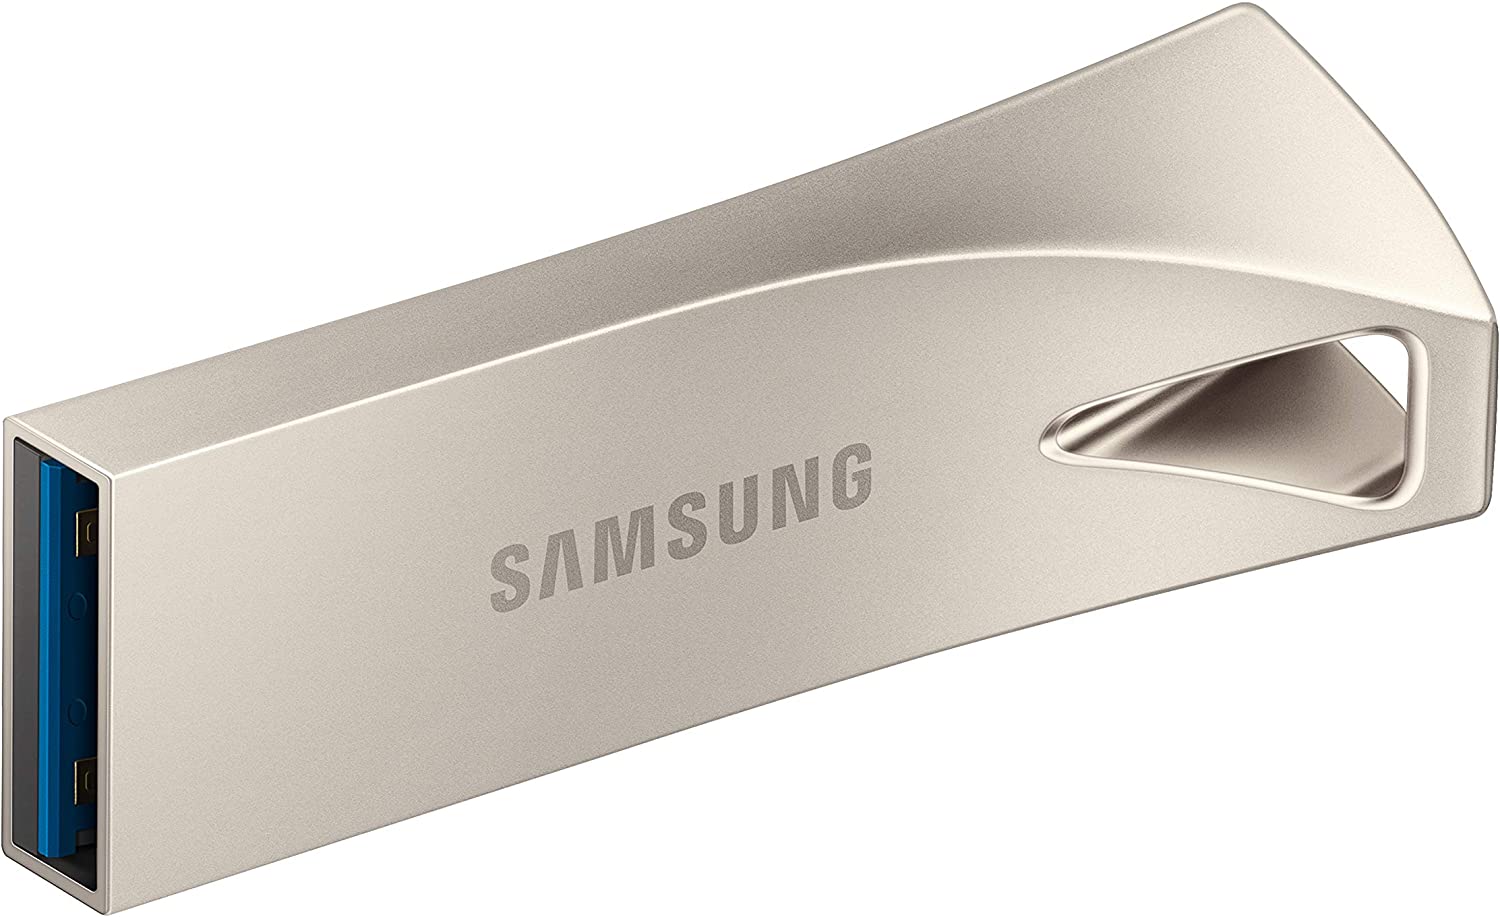 Limited-time deal: SAMSUNG BAR Plus 256GB - 400MB/s USB 3.1 Flash Drive Champagne Silver (MUF-256BE3/AM) - $23.99